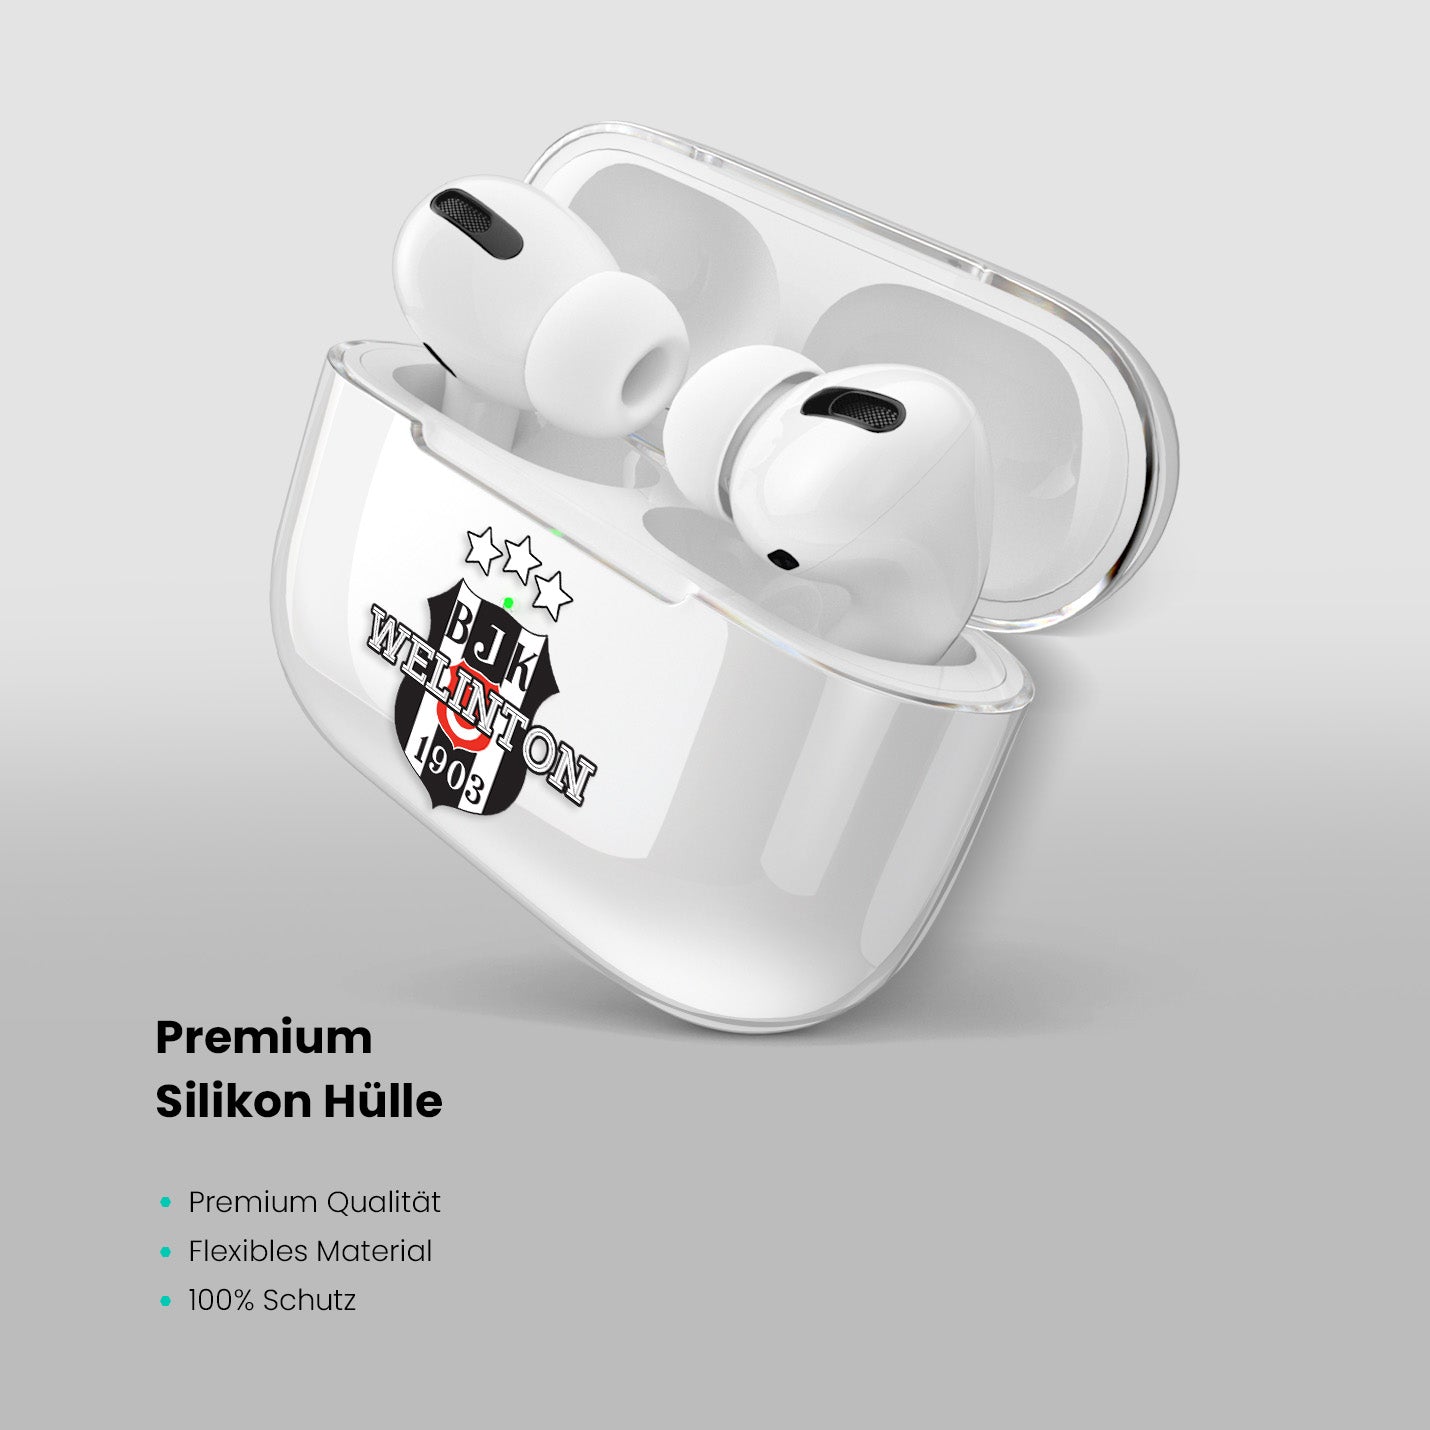 Airpods Cases - Μπεσίκτας